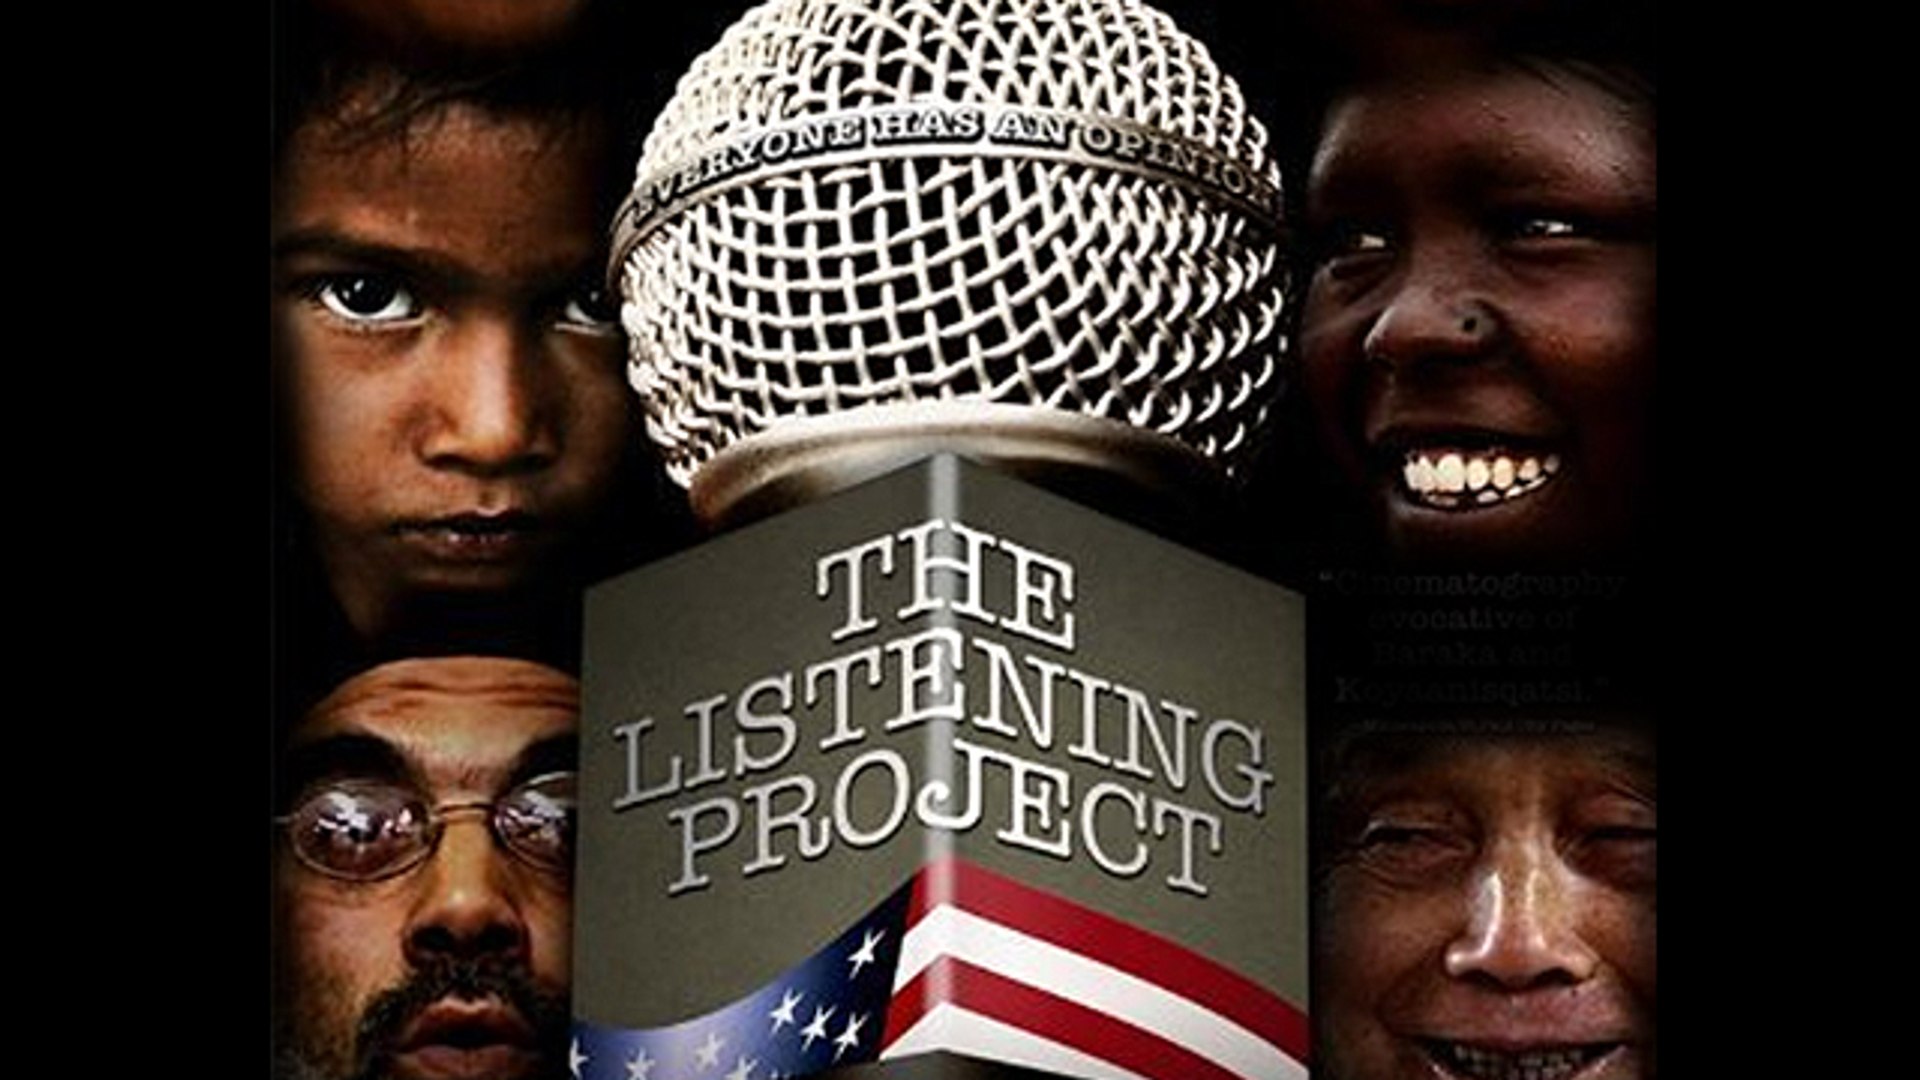 The Listening Project - Full Documentary Movie